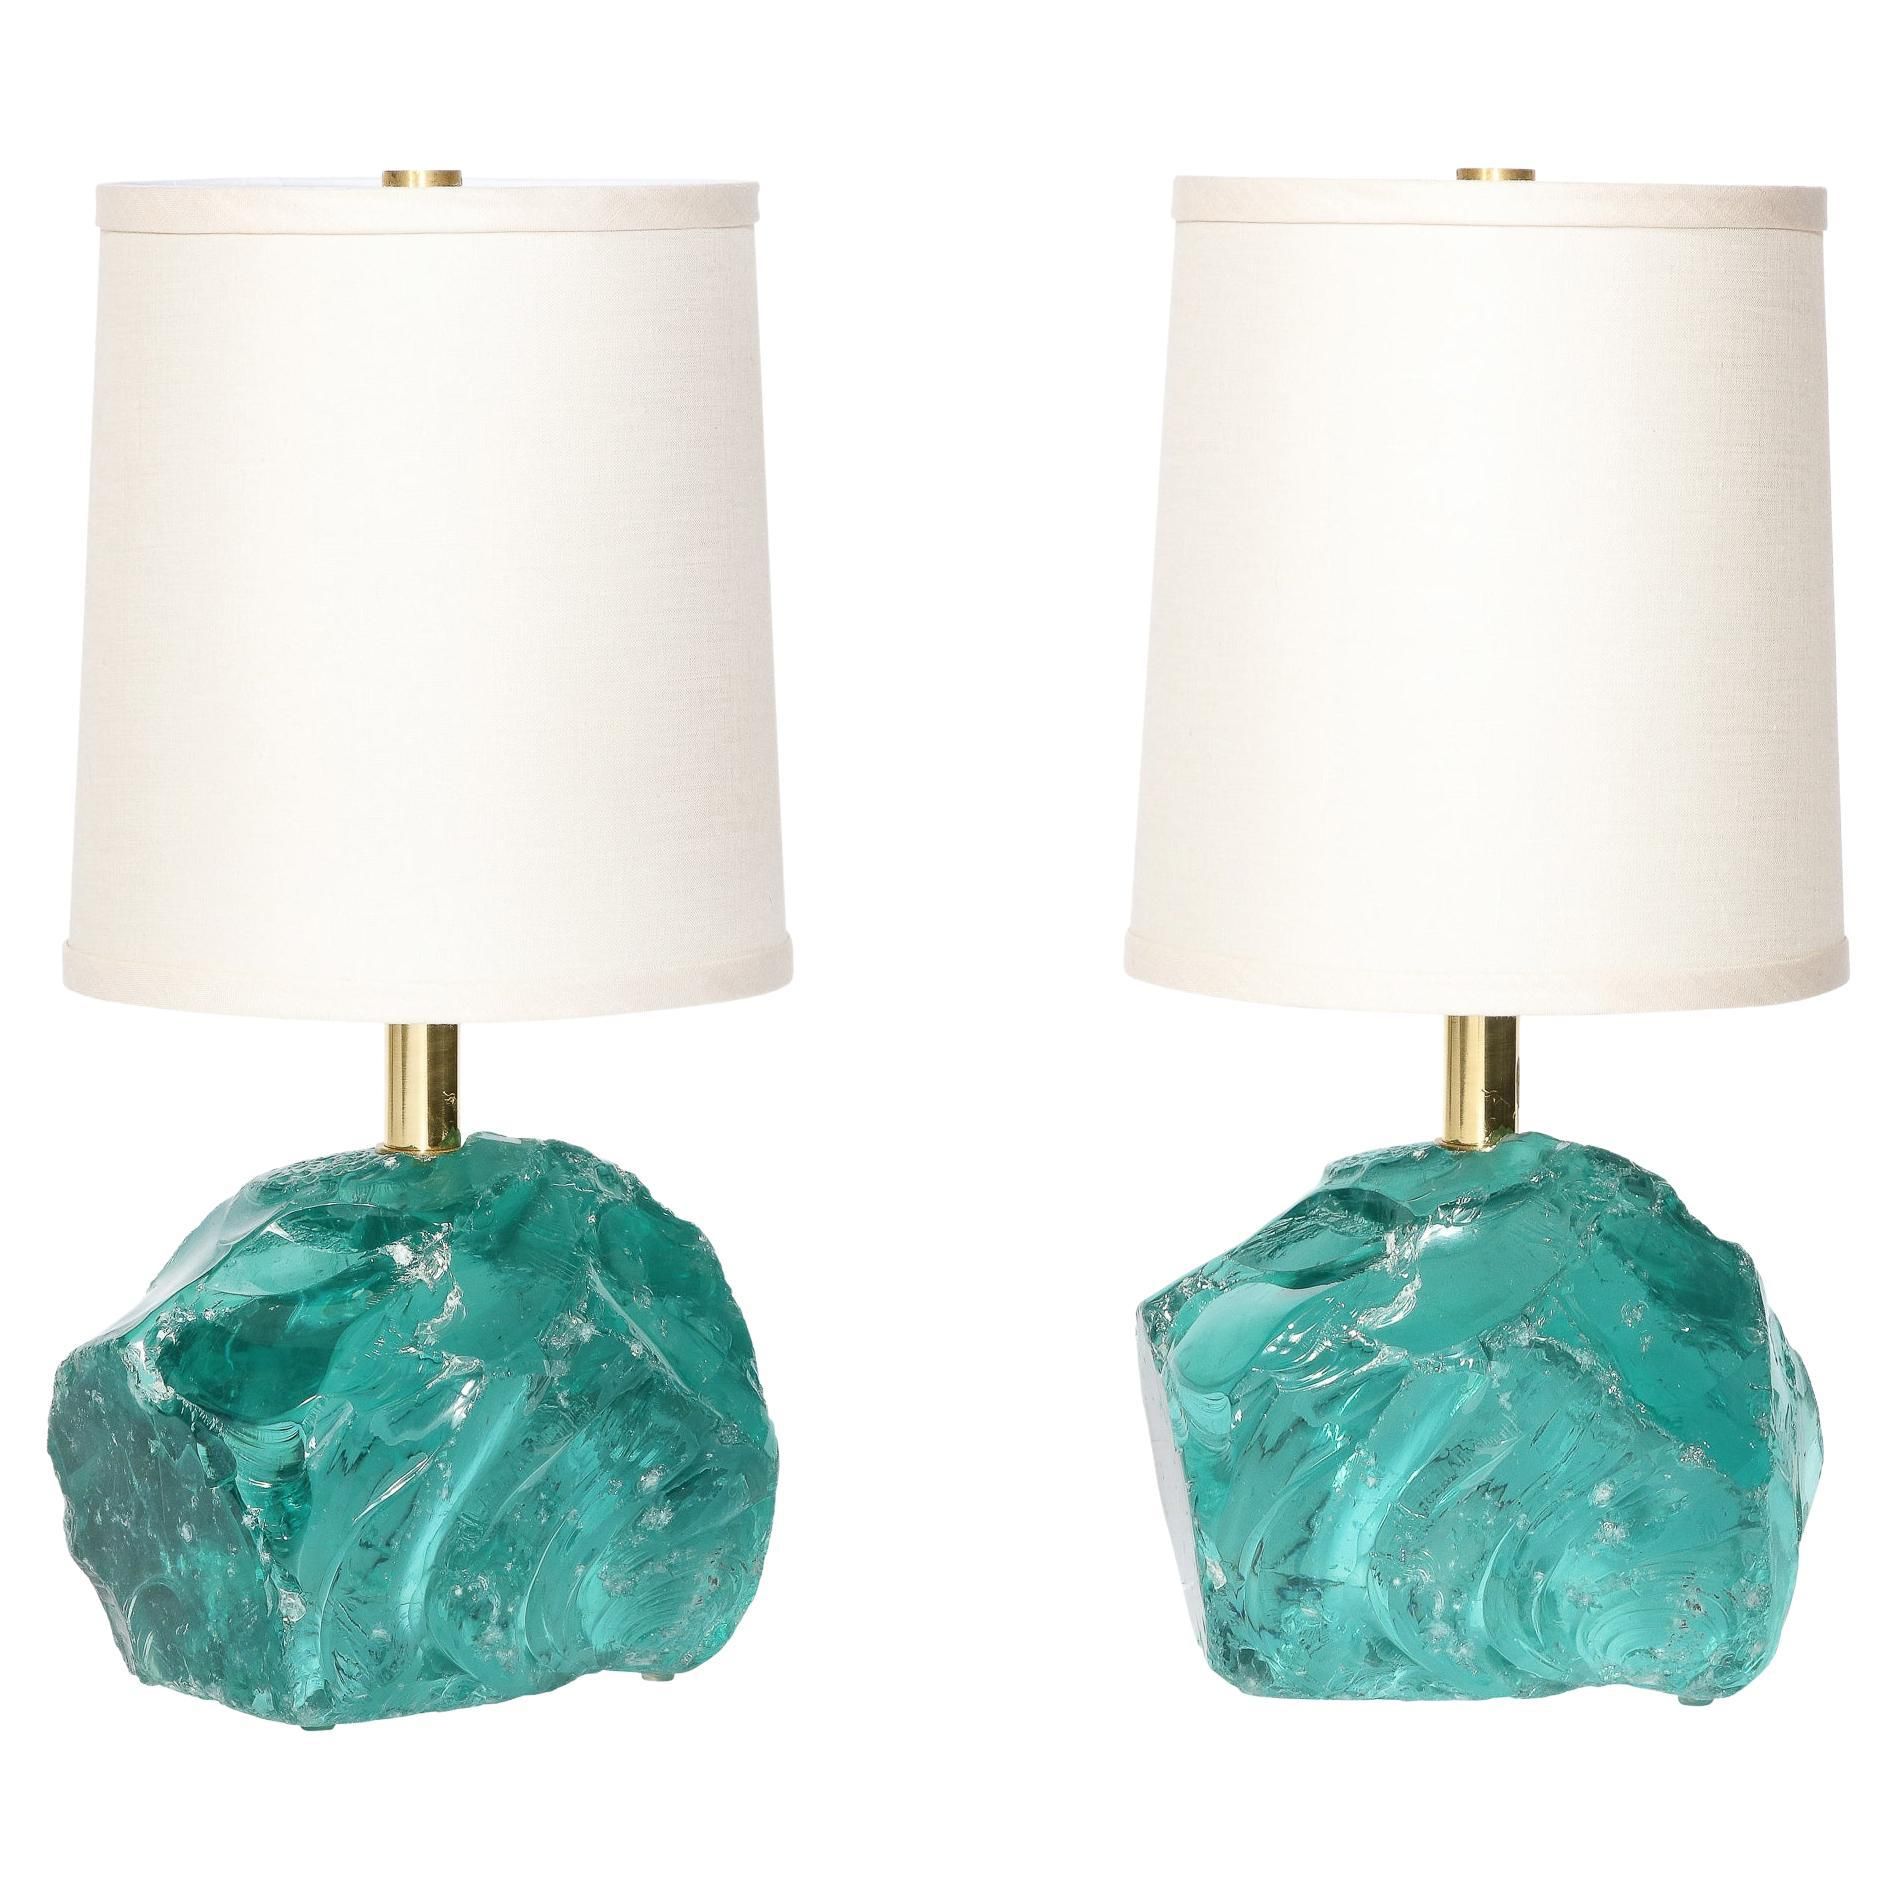 Superlative Table Lamp Illuminate your Space with the Most Stunning Table Lamp in the Market